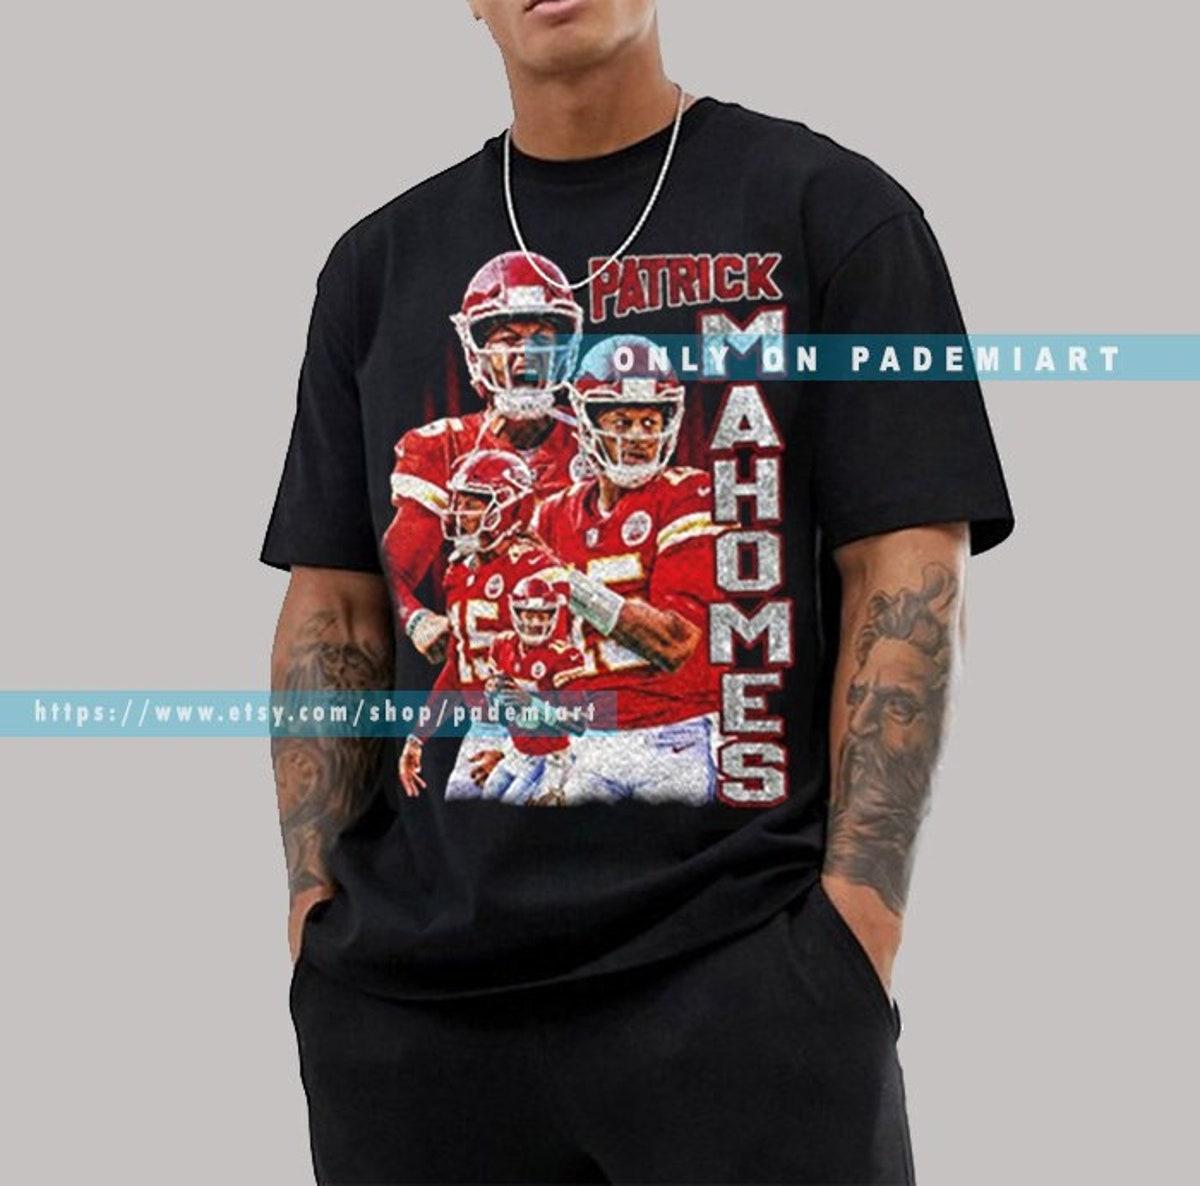 Football Player Patrick Mahomes Vintage T-shirt Best Sports Fans Gifts - Apparel, Mug, Home Decor - Perfect Gift For Everyone